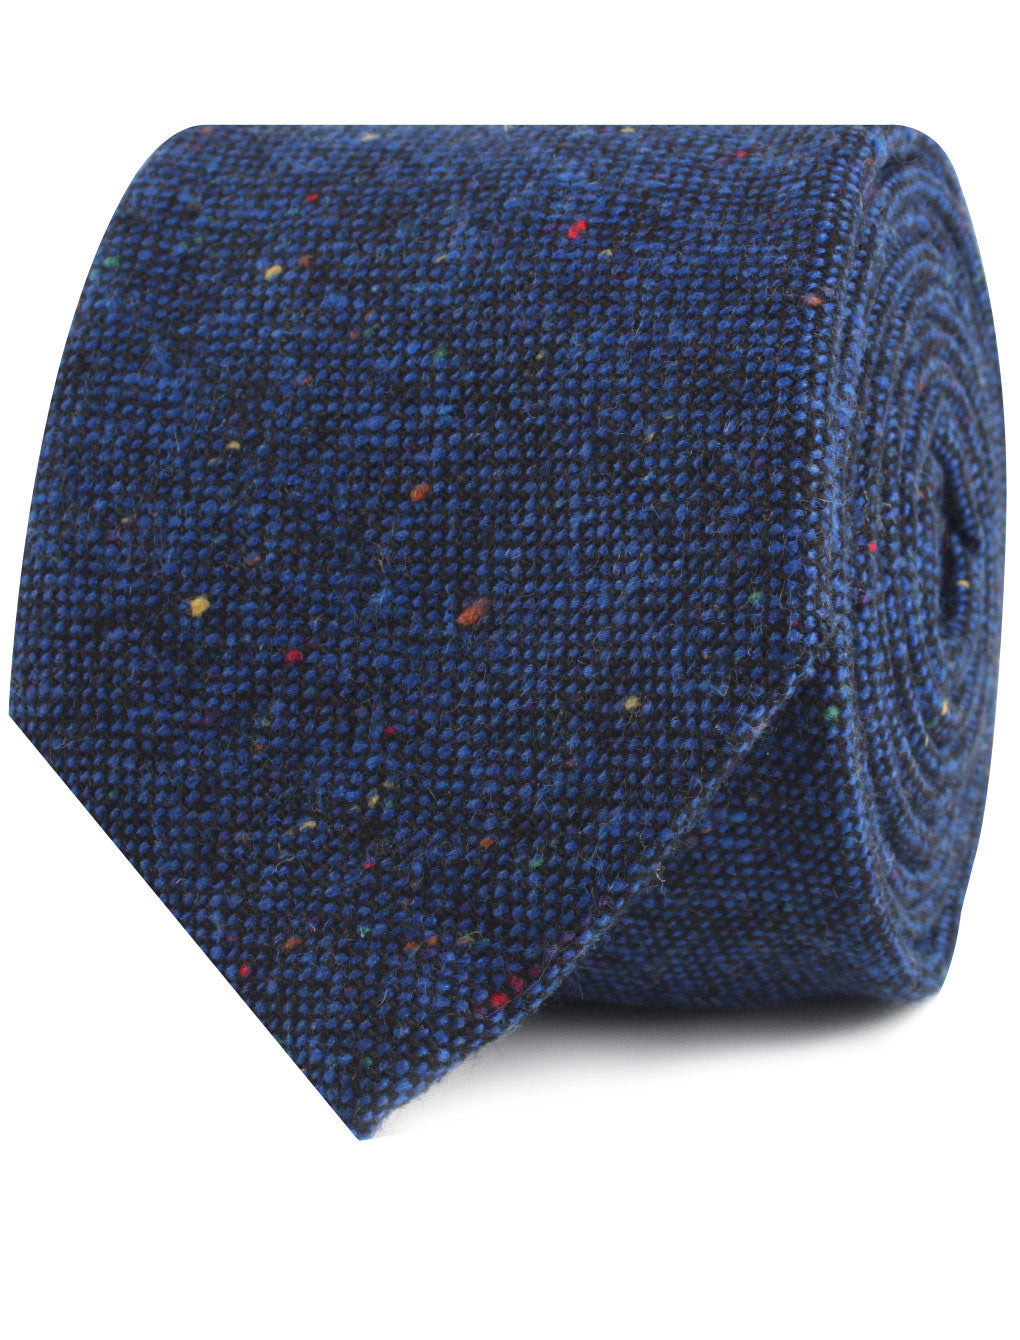 Speckles on Blue Donegal Necktie